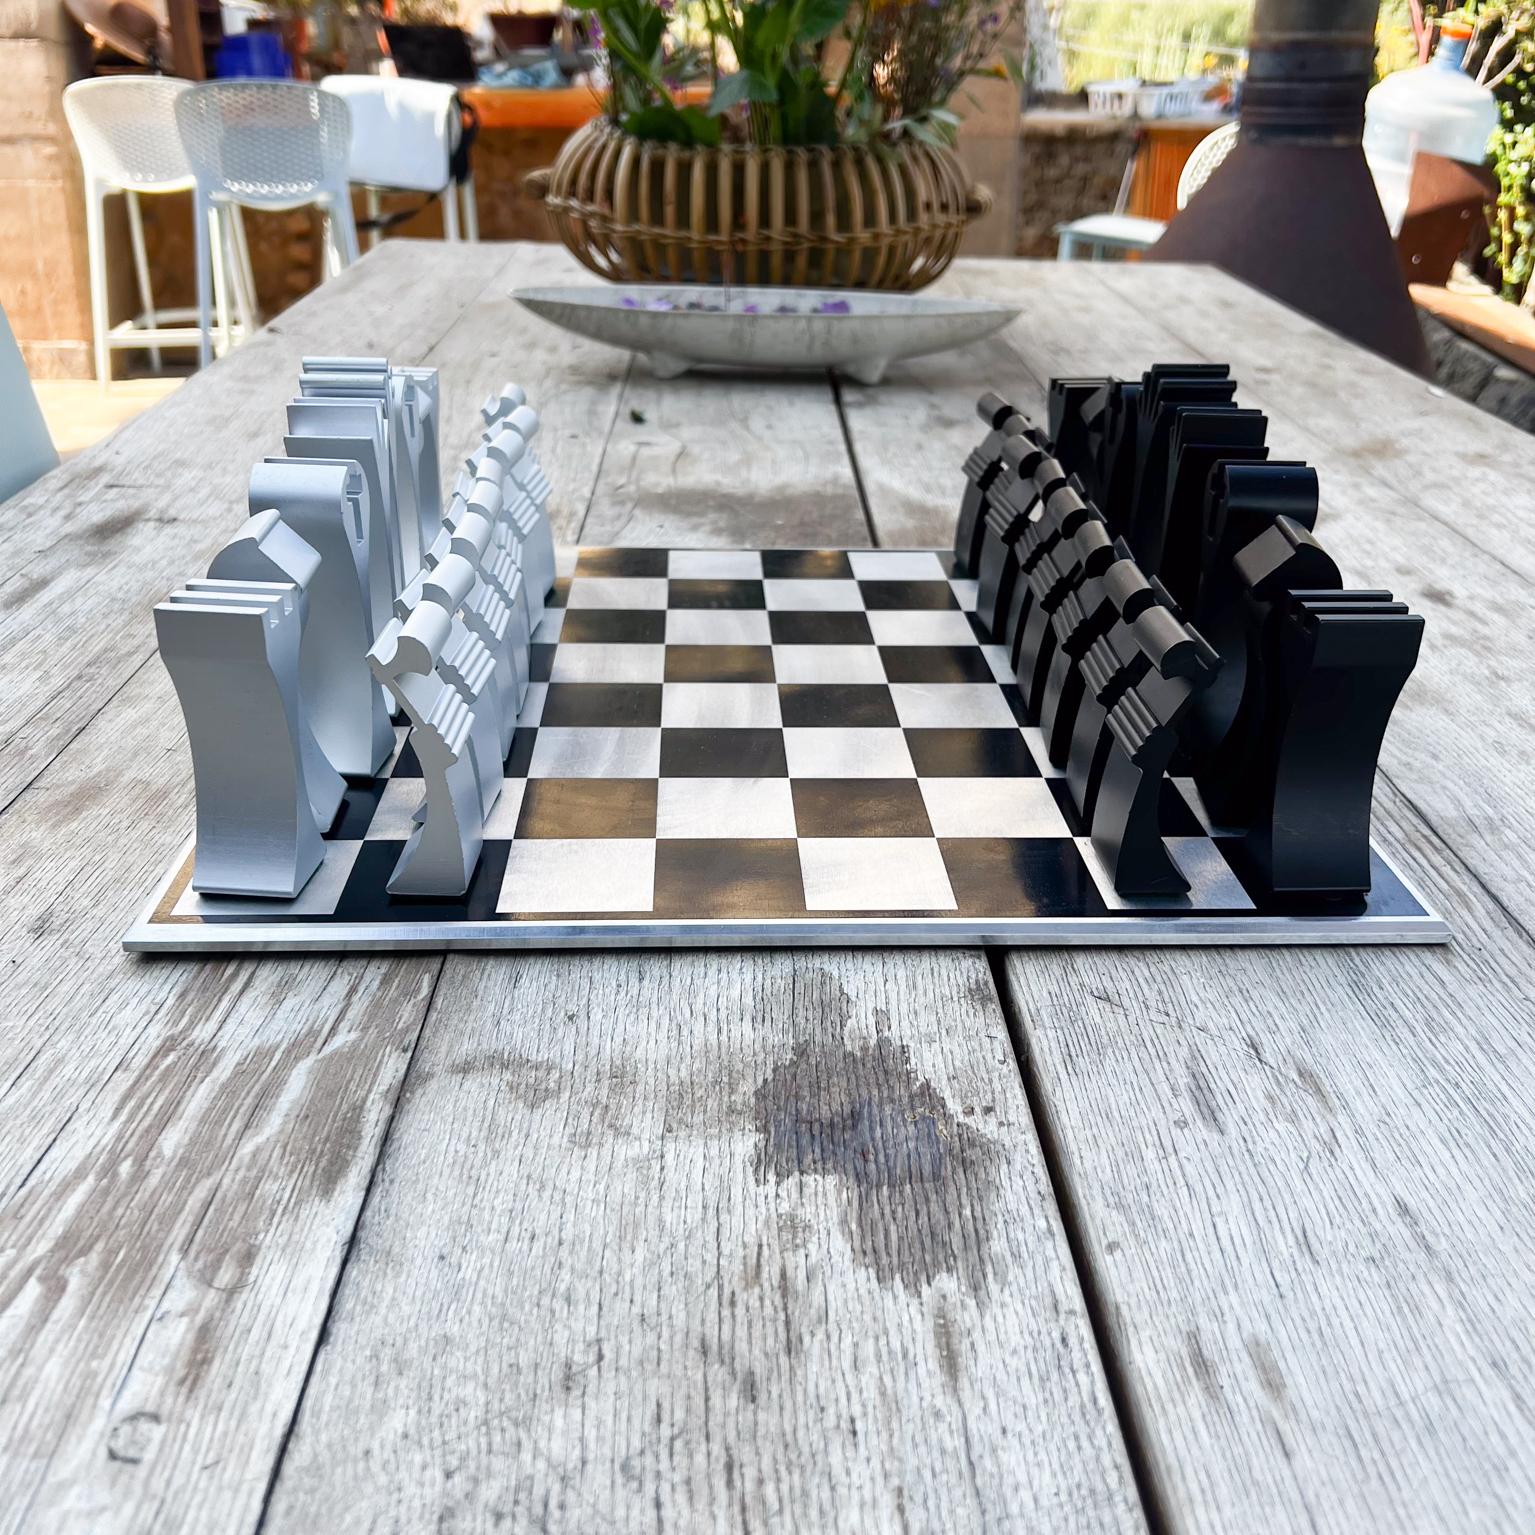 1972 Modernist Columbia Aluminum Chess Set by Scott Wolfe In Good Condition For Sale In Chula Vista, CA